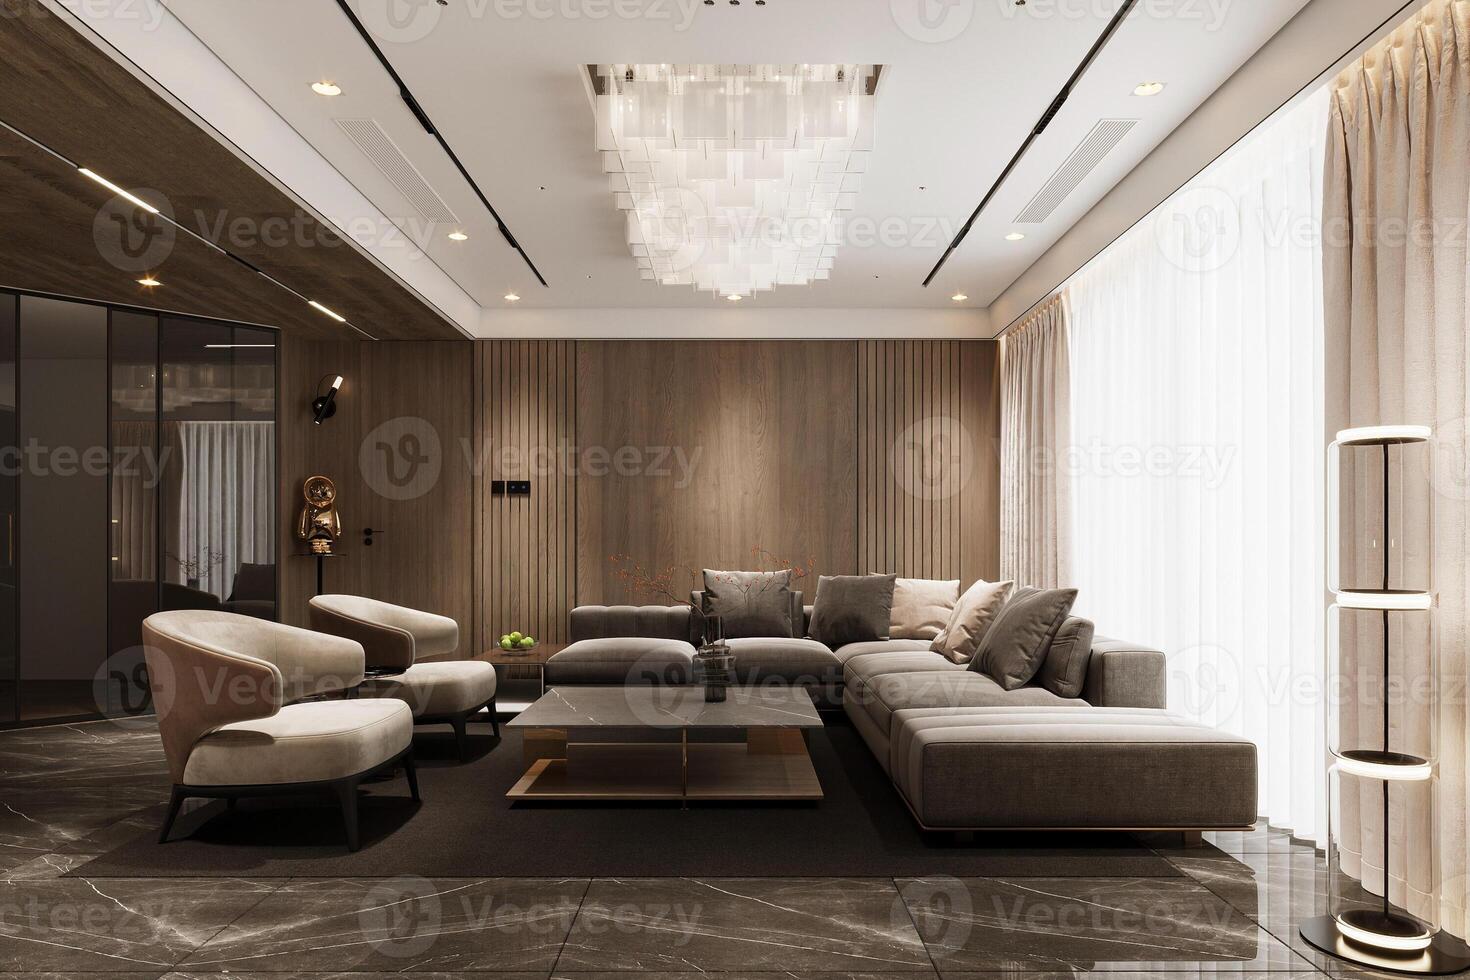 Interior of Living Room Modern style with Grey fabric sofa, Wooden side table, and white ceiling lamp photo